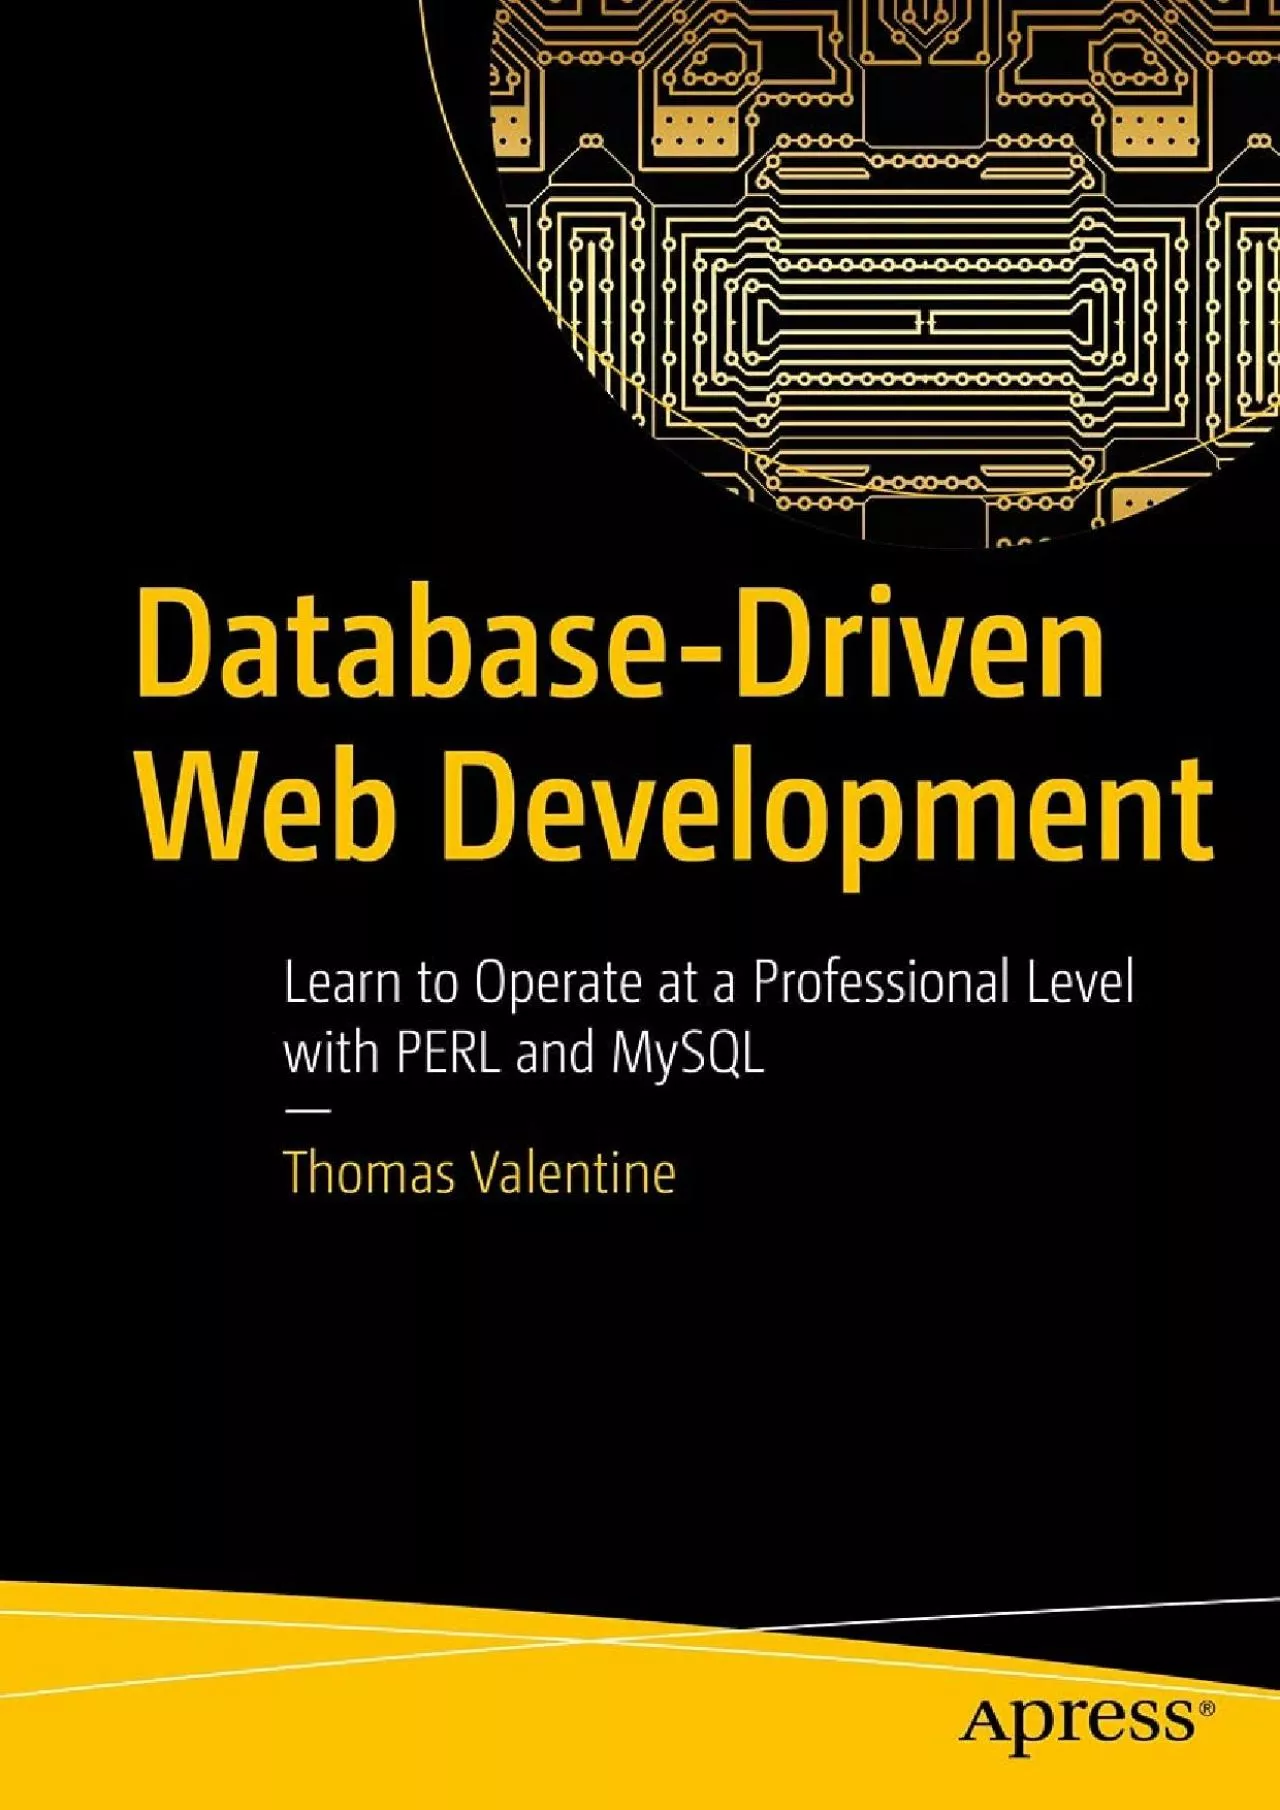 [eBOOK]-Database-Driven Web Development Learn to Operate at a Professional Level with